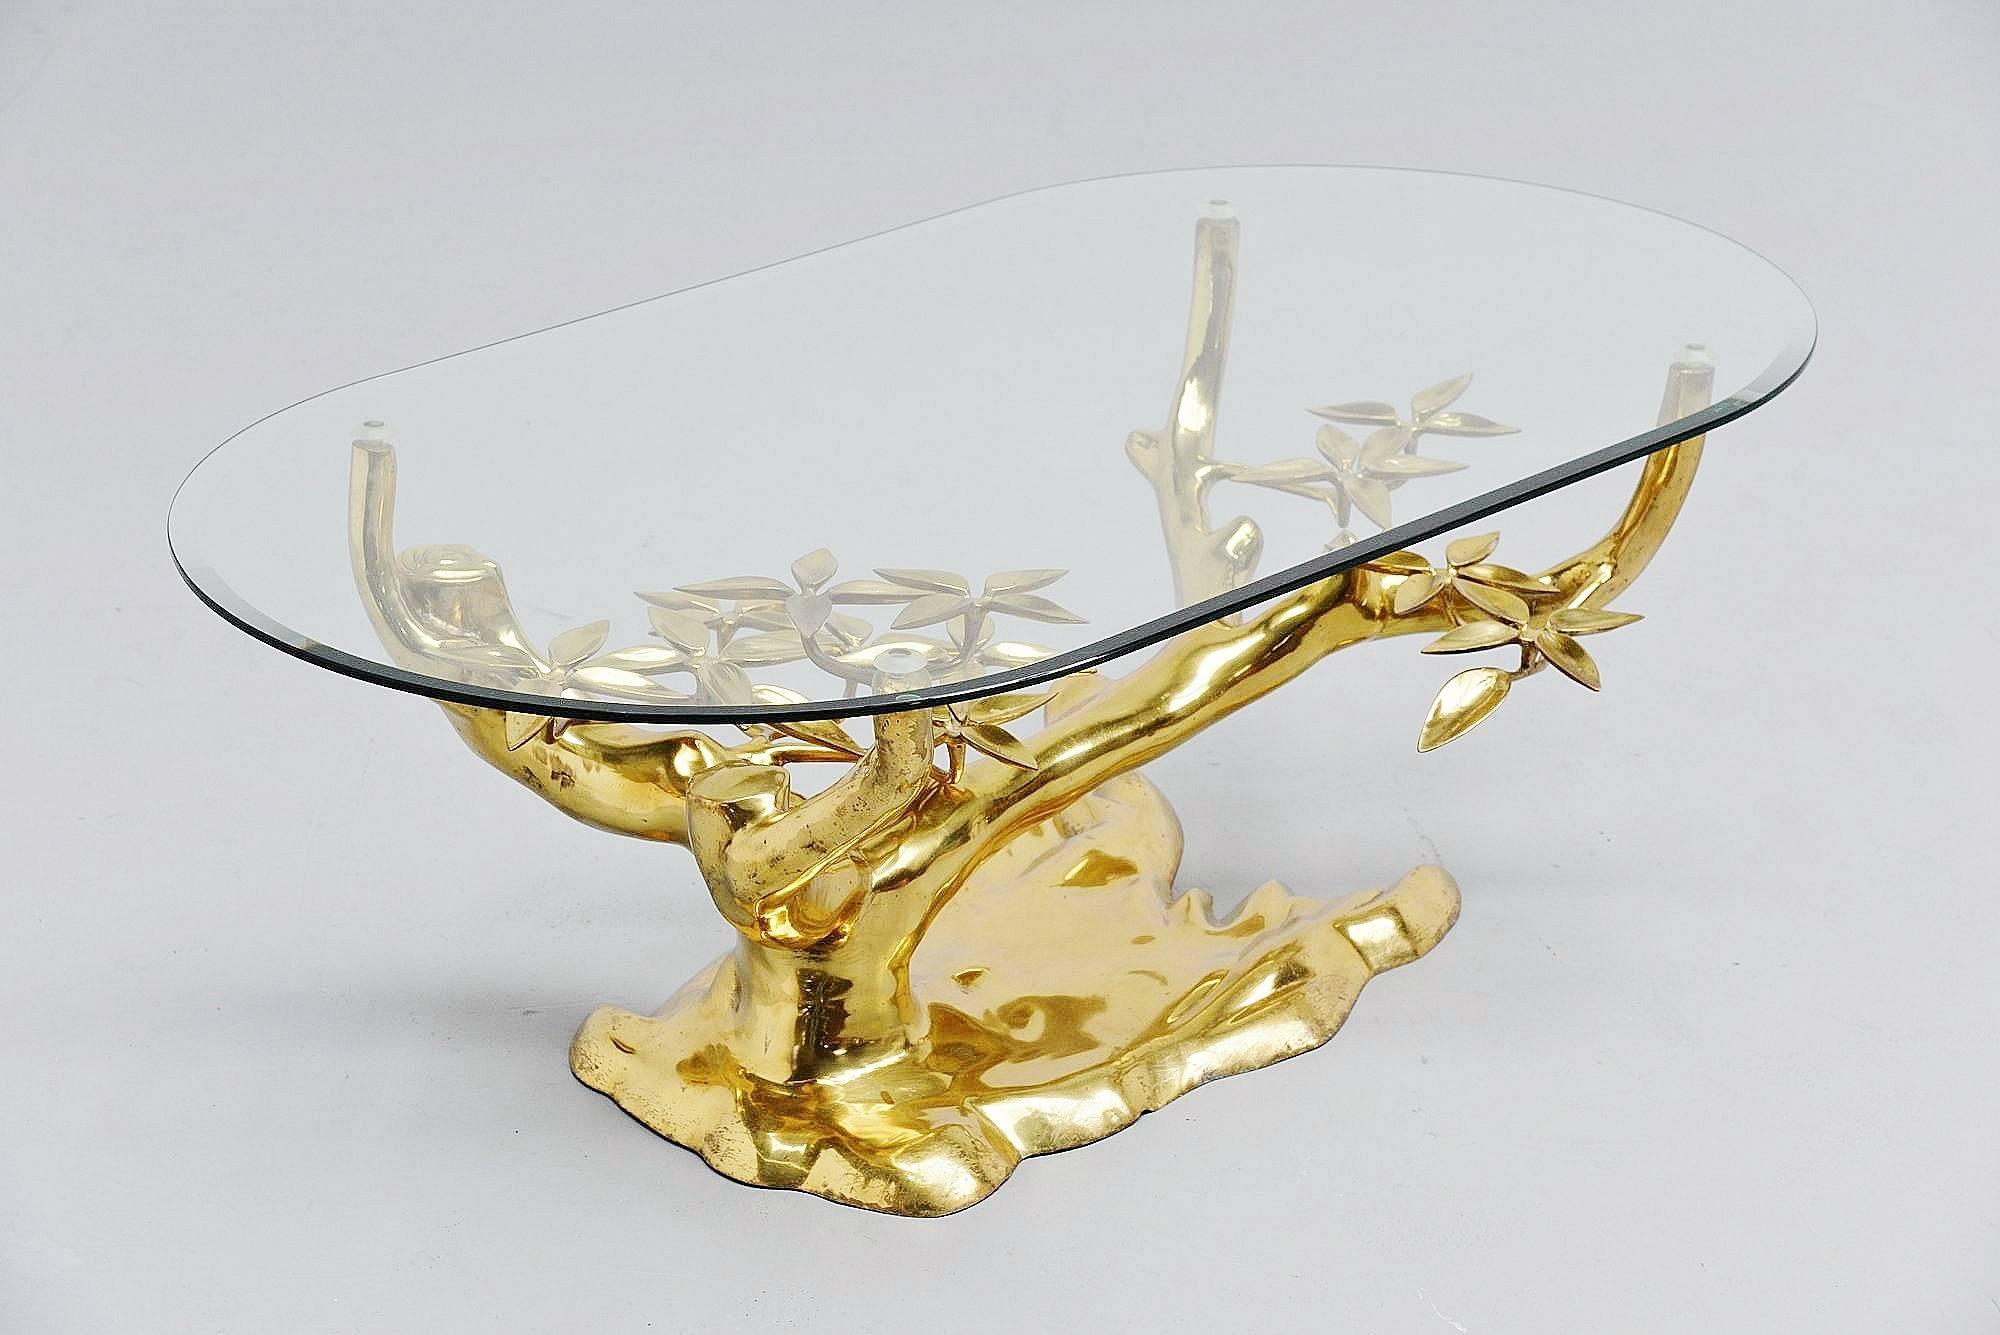 Sculptural coffee table in solid bronze Belgium, 1970. This very nice sculpted bronze coffee table has a (bonsai) tree form and a glass oval top. The base is made of solid bronze and has a transparent lacquer finish to protect the bronzes glaze.